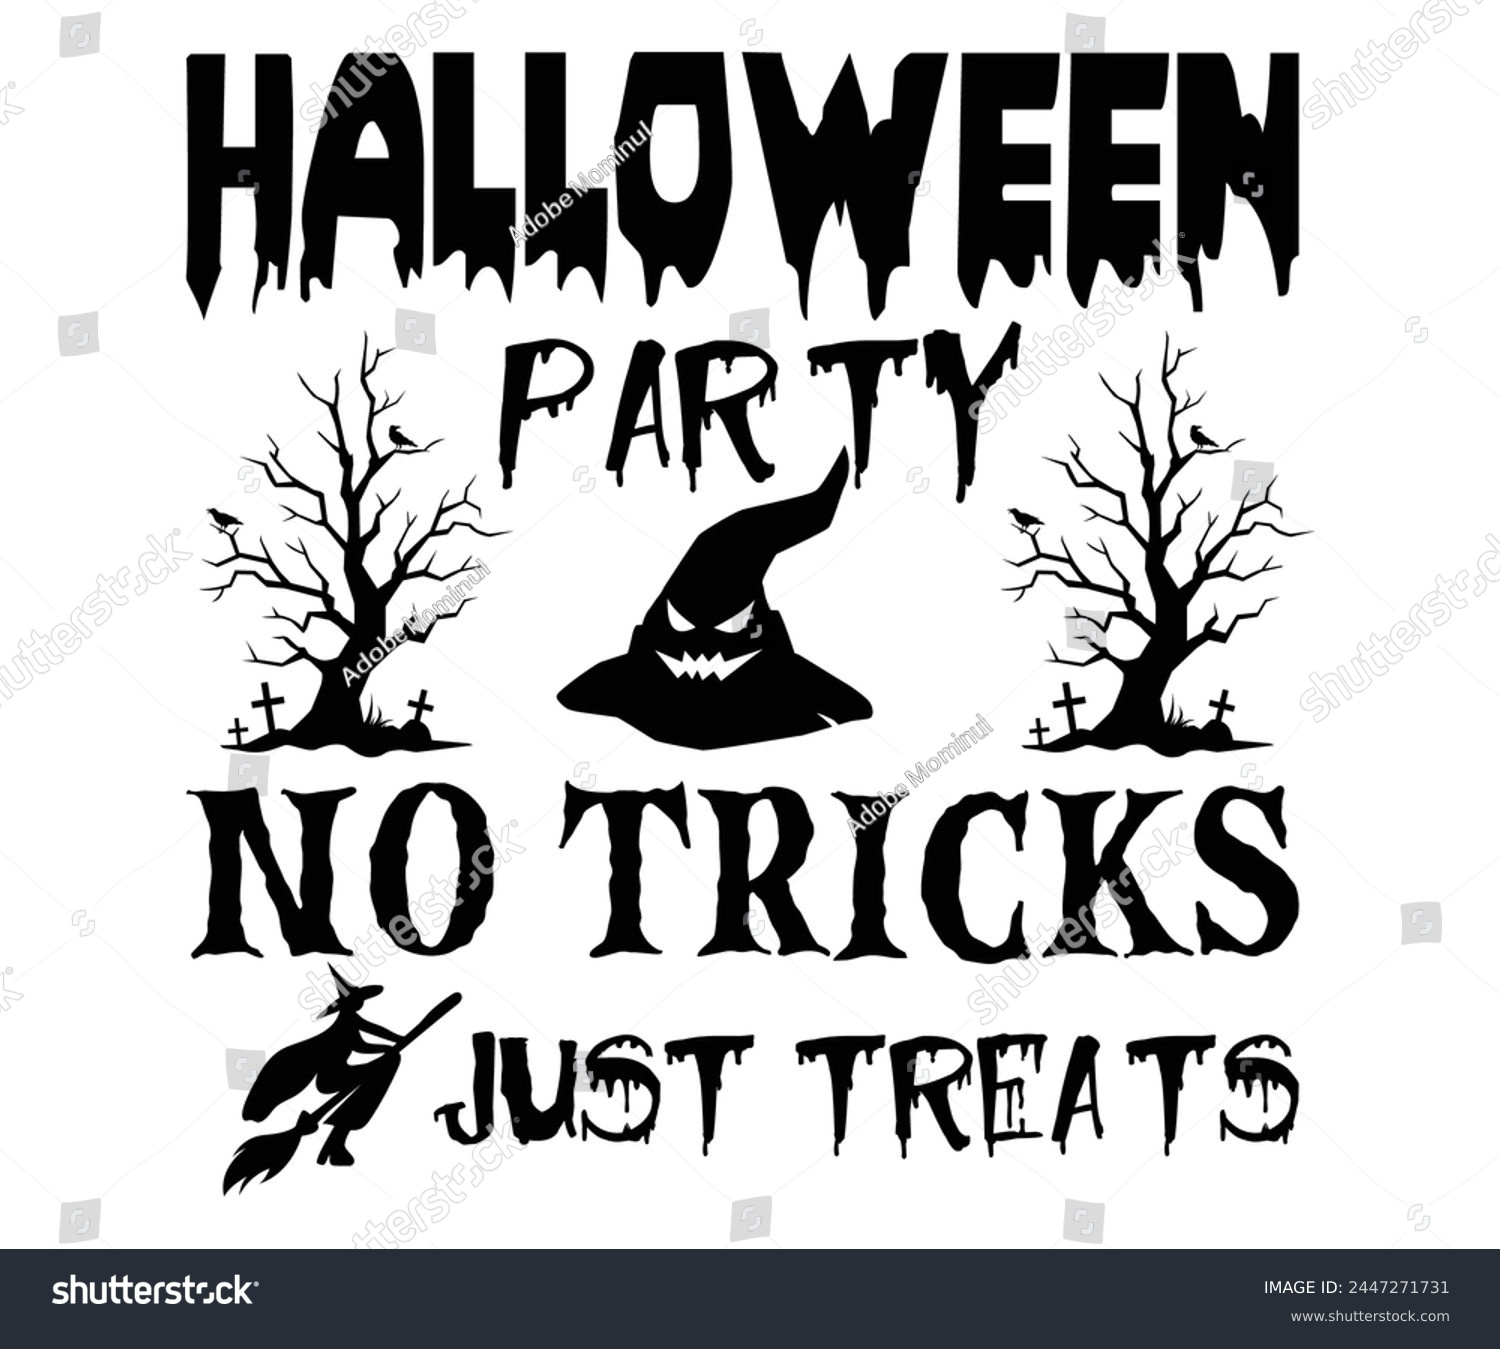 SVG of Halloween Perty No Tricks Just Treats,Halloween Svg,Typography,Halloween Quotes,Witches Svg,Halloween Party,Halloween Costume,Halloween Gift,Funny Halloween,Spooky Svg,Funny T shirt,Ghost Svg,Cut file svg